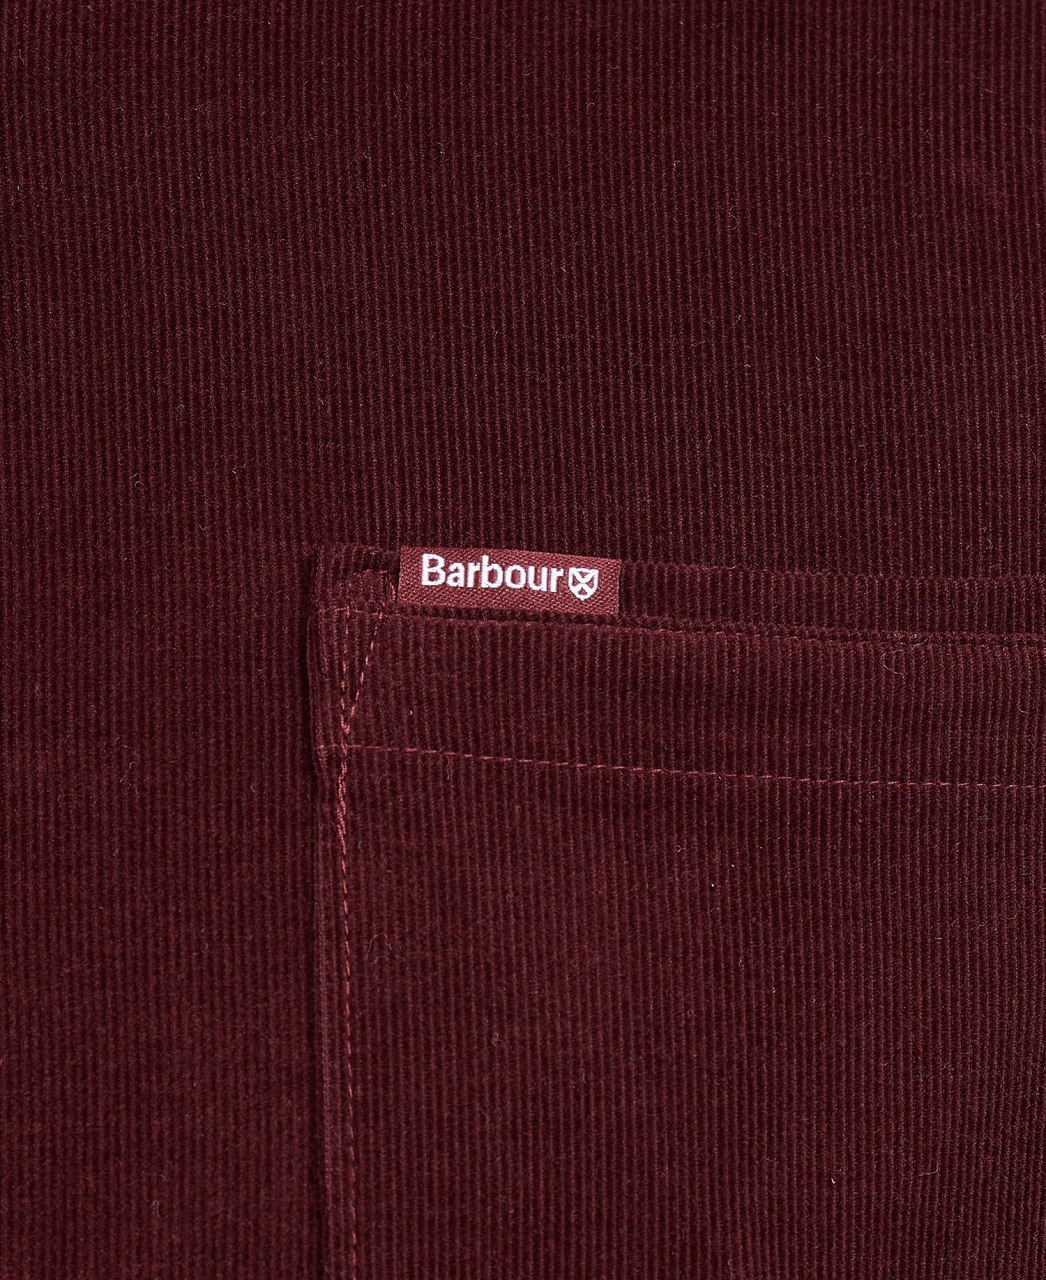 Barbour Ramsey Cord Shirt - winter red